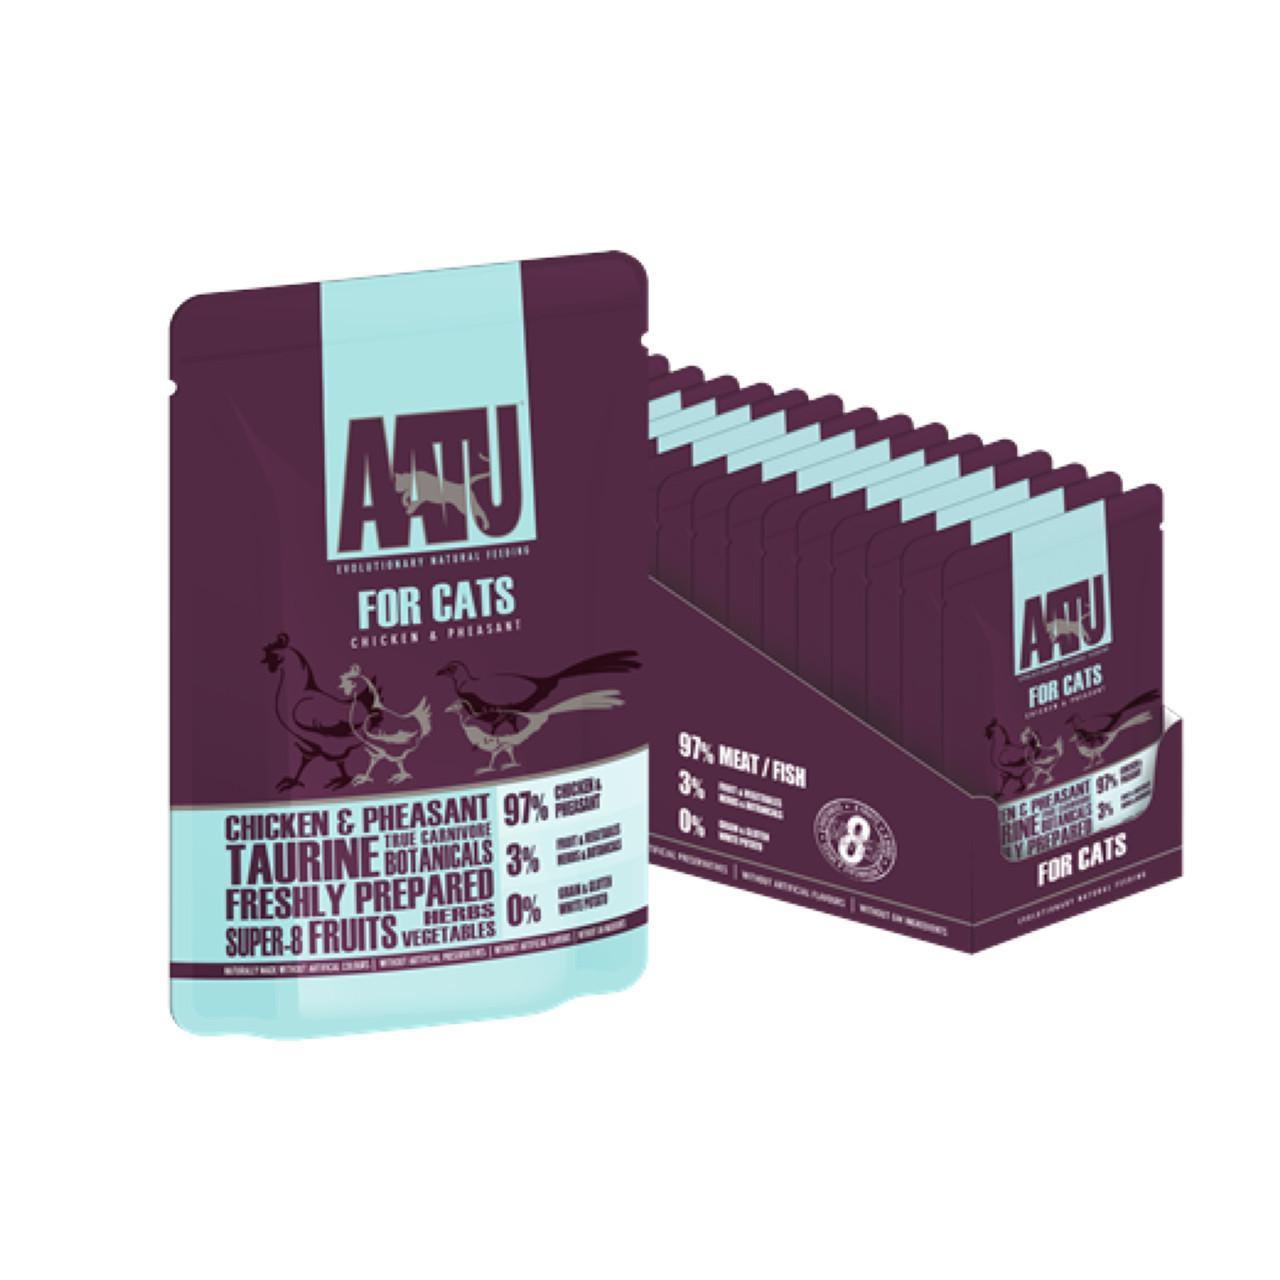 An image of AATU For Cats Chicken & Pheasant Pouches